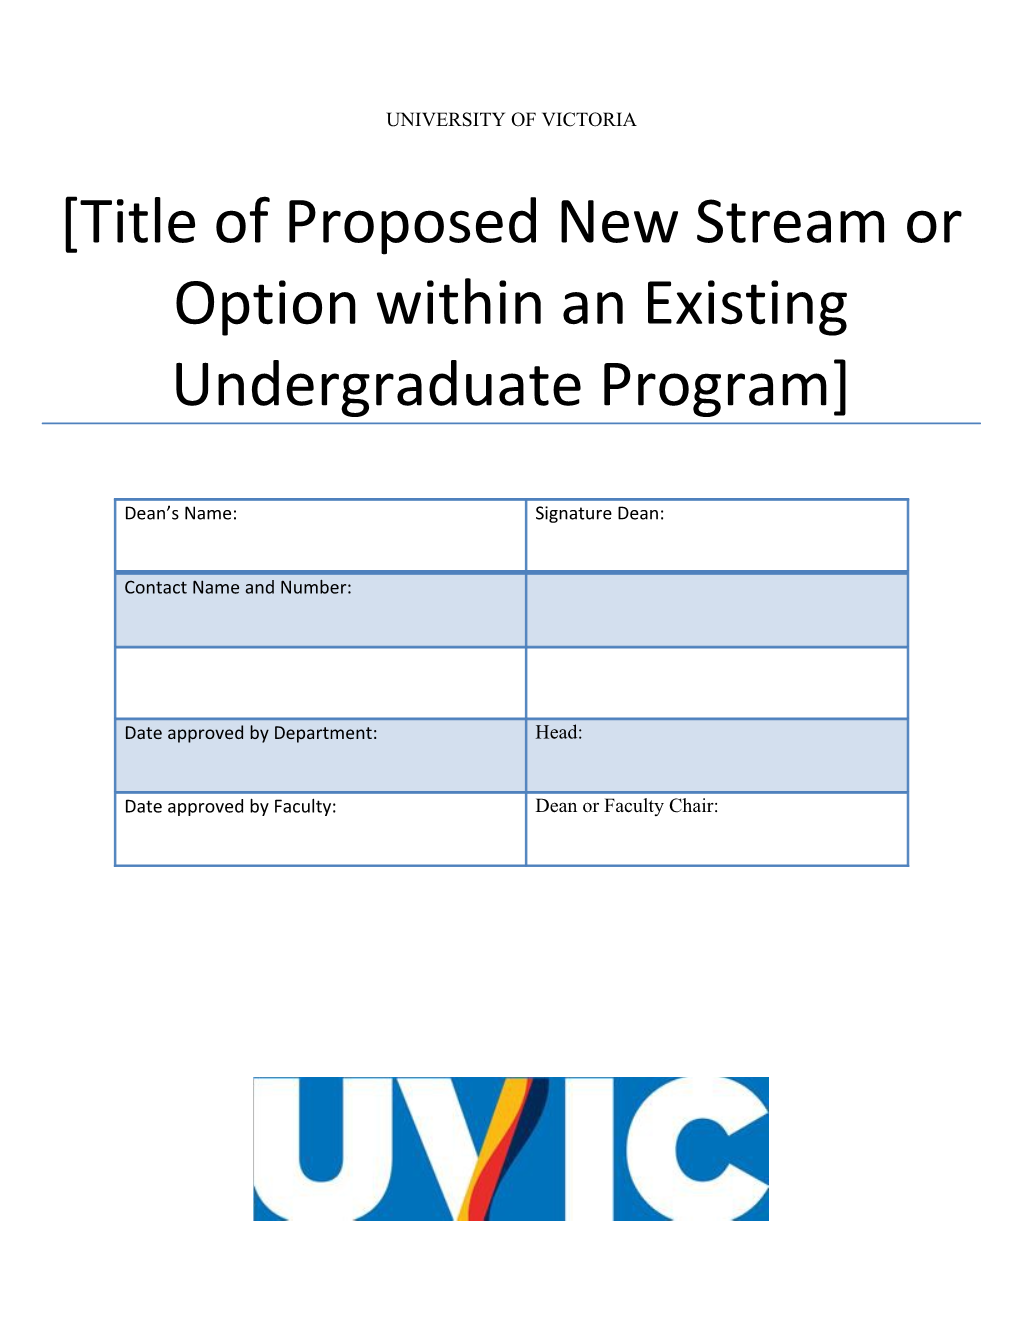 Title of Proposed New Stream Or Option Within an Existing Undergraduate Program